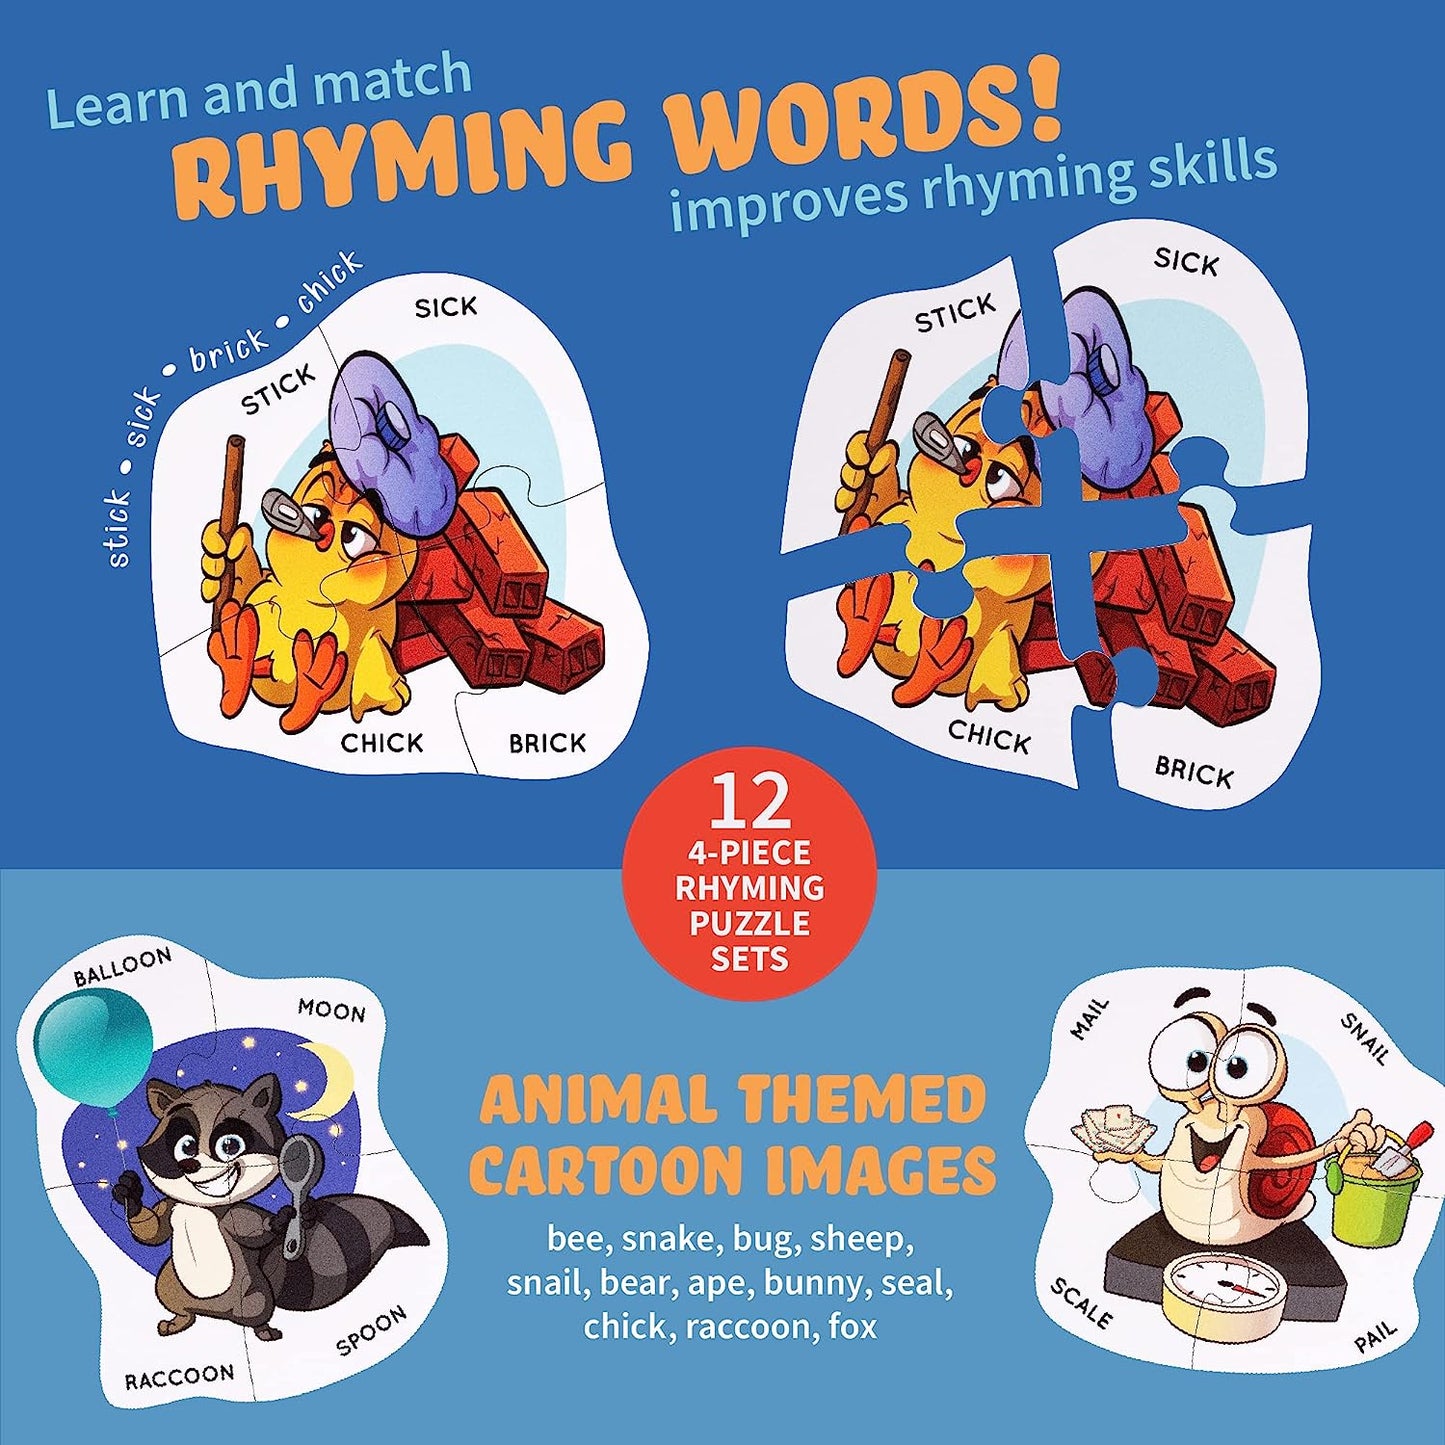 Rhyming Puzzle Matching Game, Learn to Rhyme Puzzle Animal Matching 4 Piece Puzzle Sets, Educational Preschool Games, Speech Therapy Games